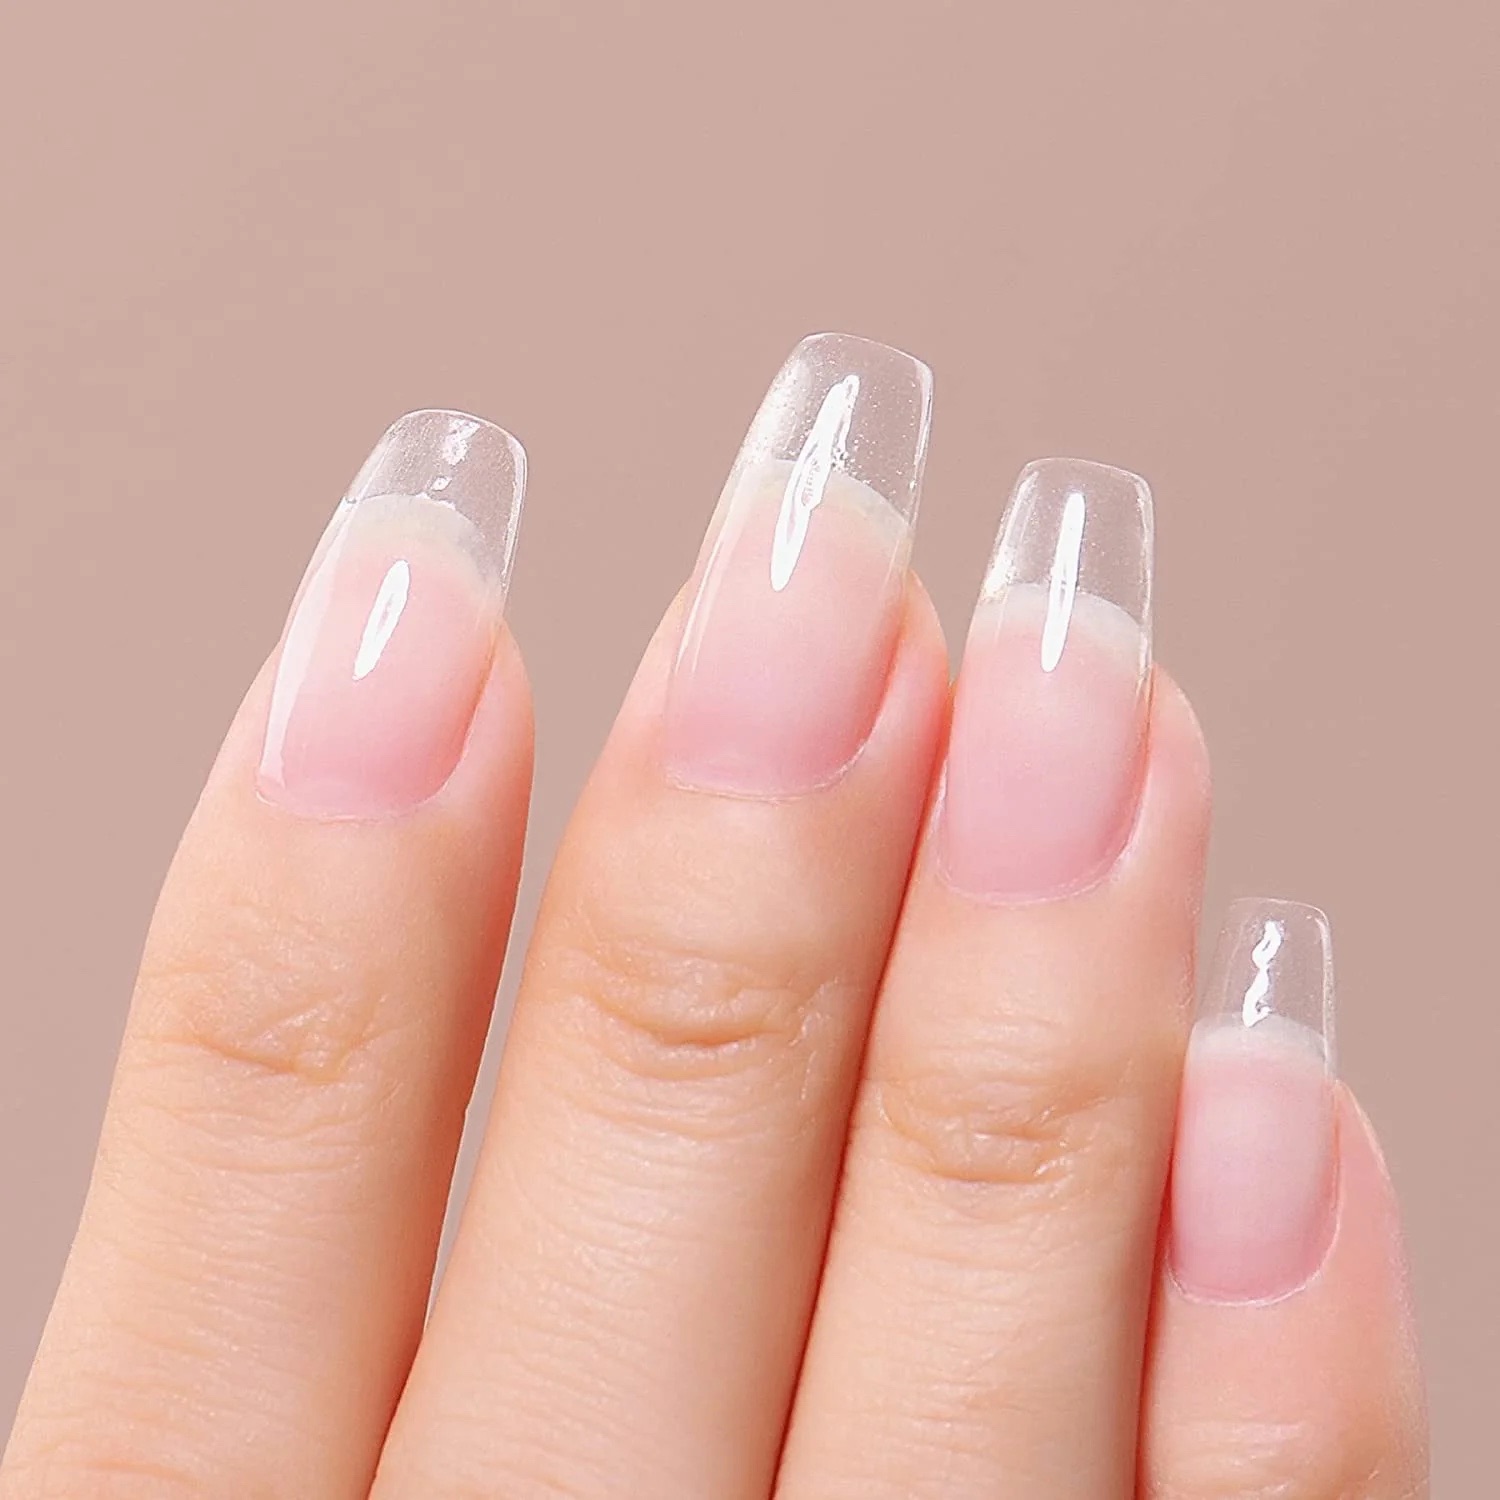 500 Nail Tips False Nails For Acrylic Gel Extension Cover Nails, Colouring  Style | eBay